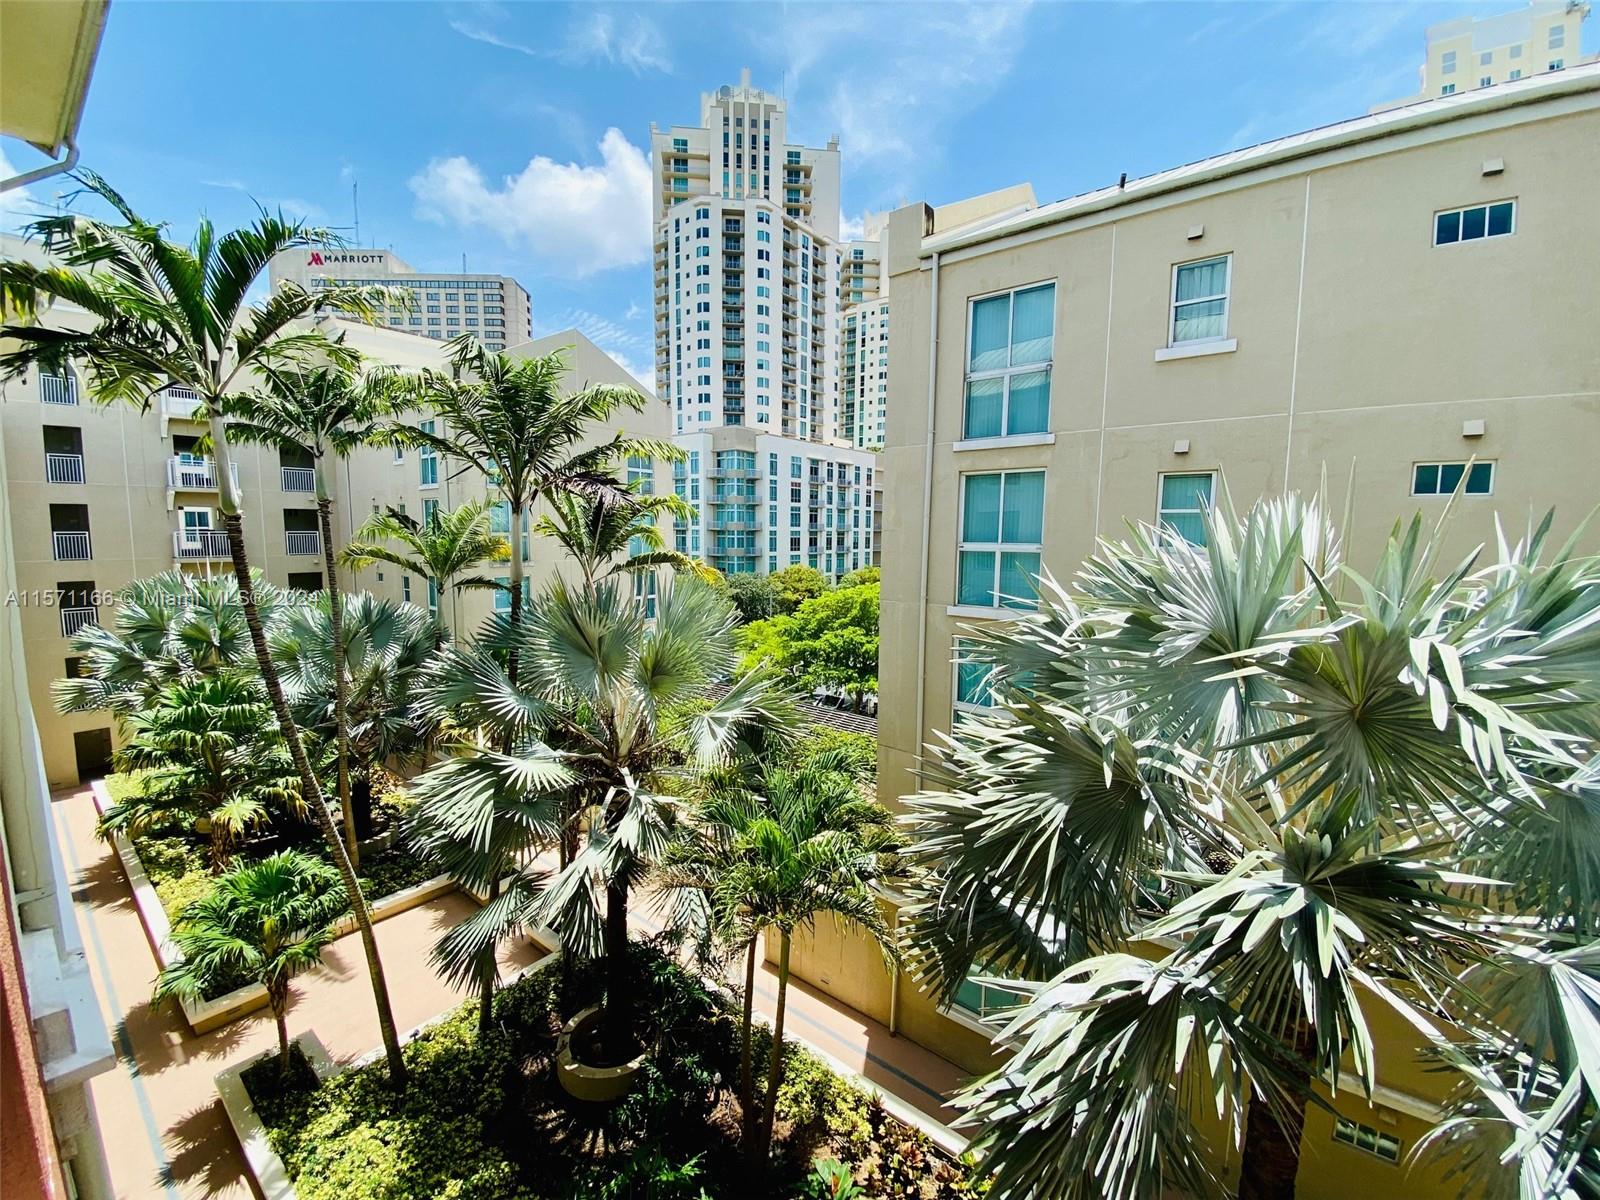 7285 SW 90th St D612, Miami, Florida 33156, 1 Bedroom Bedrooms, ,1 BathroomBathrooms,Residential,For Sale,7285 SW 90th St D612,A11571166